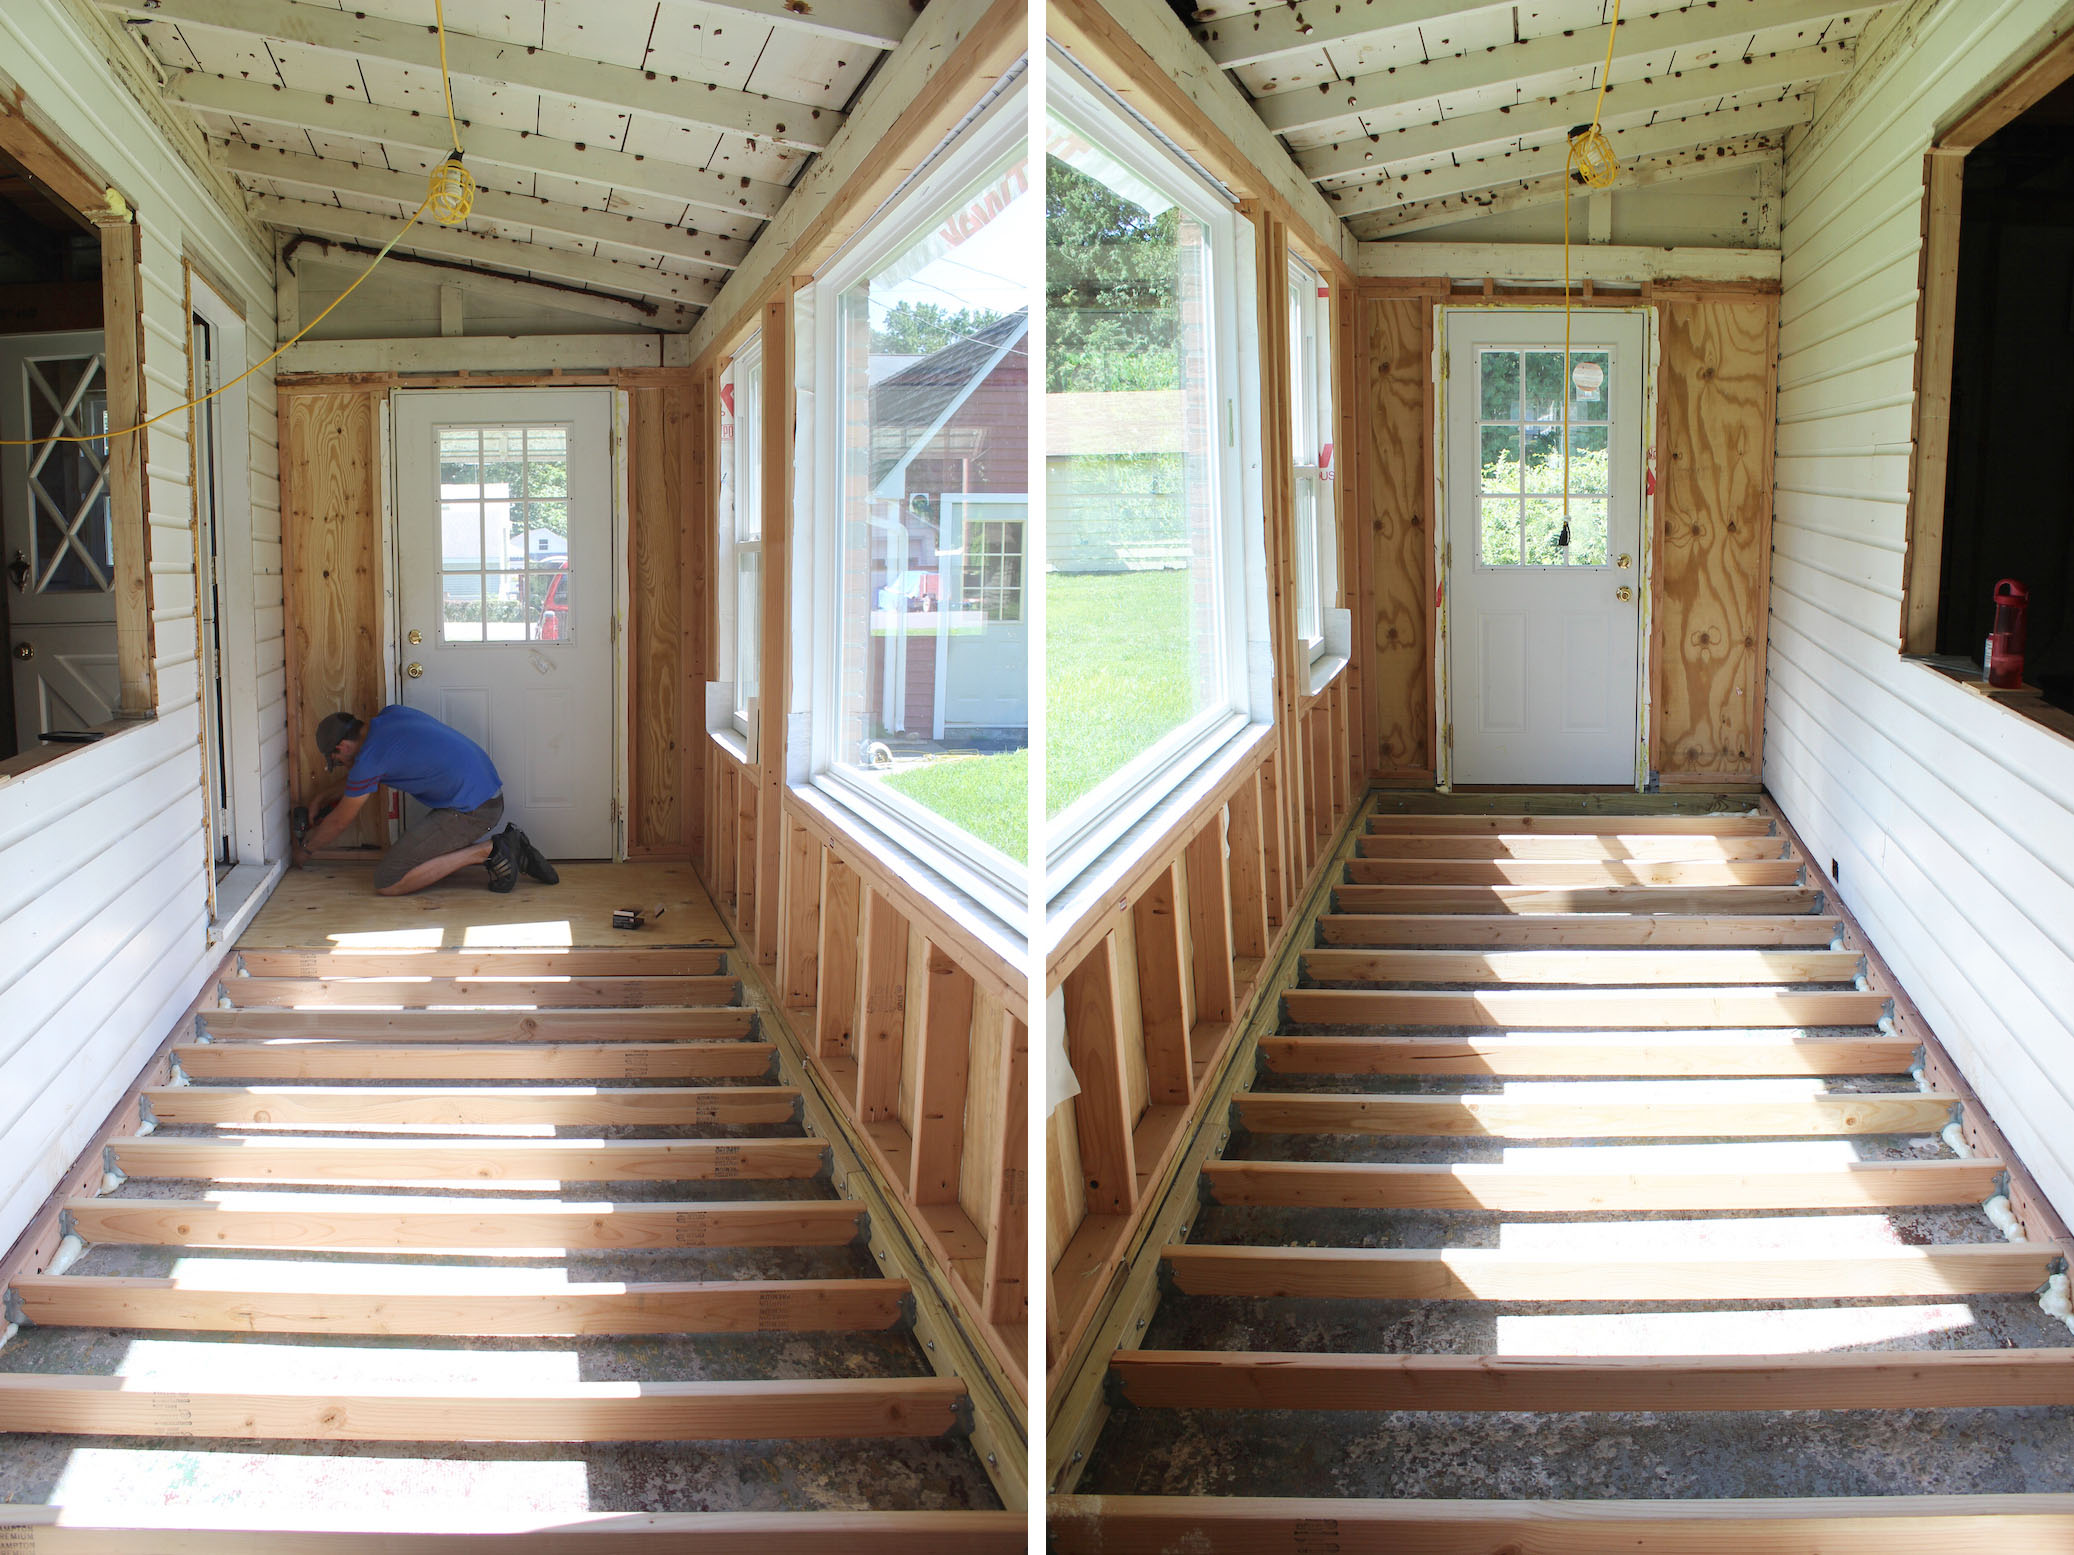 Our Entryway Construction Update